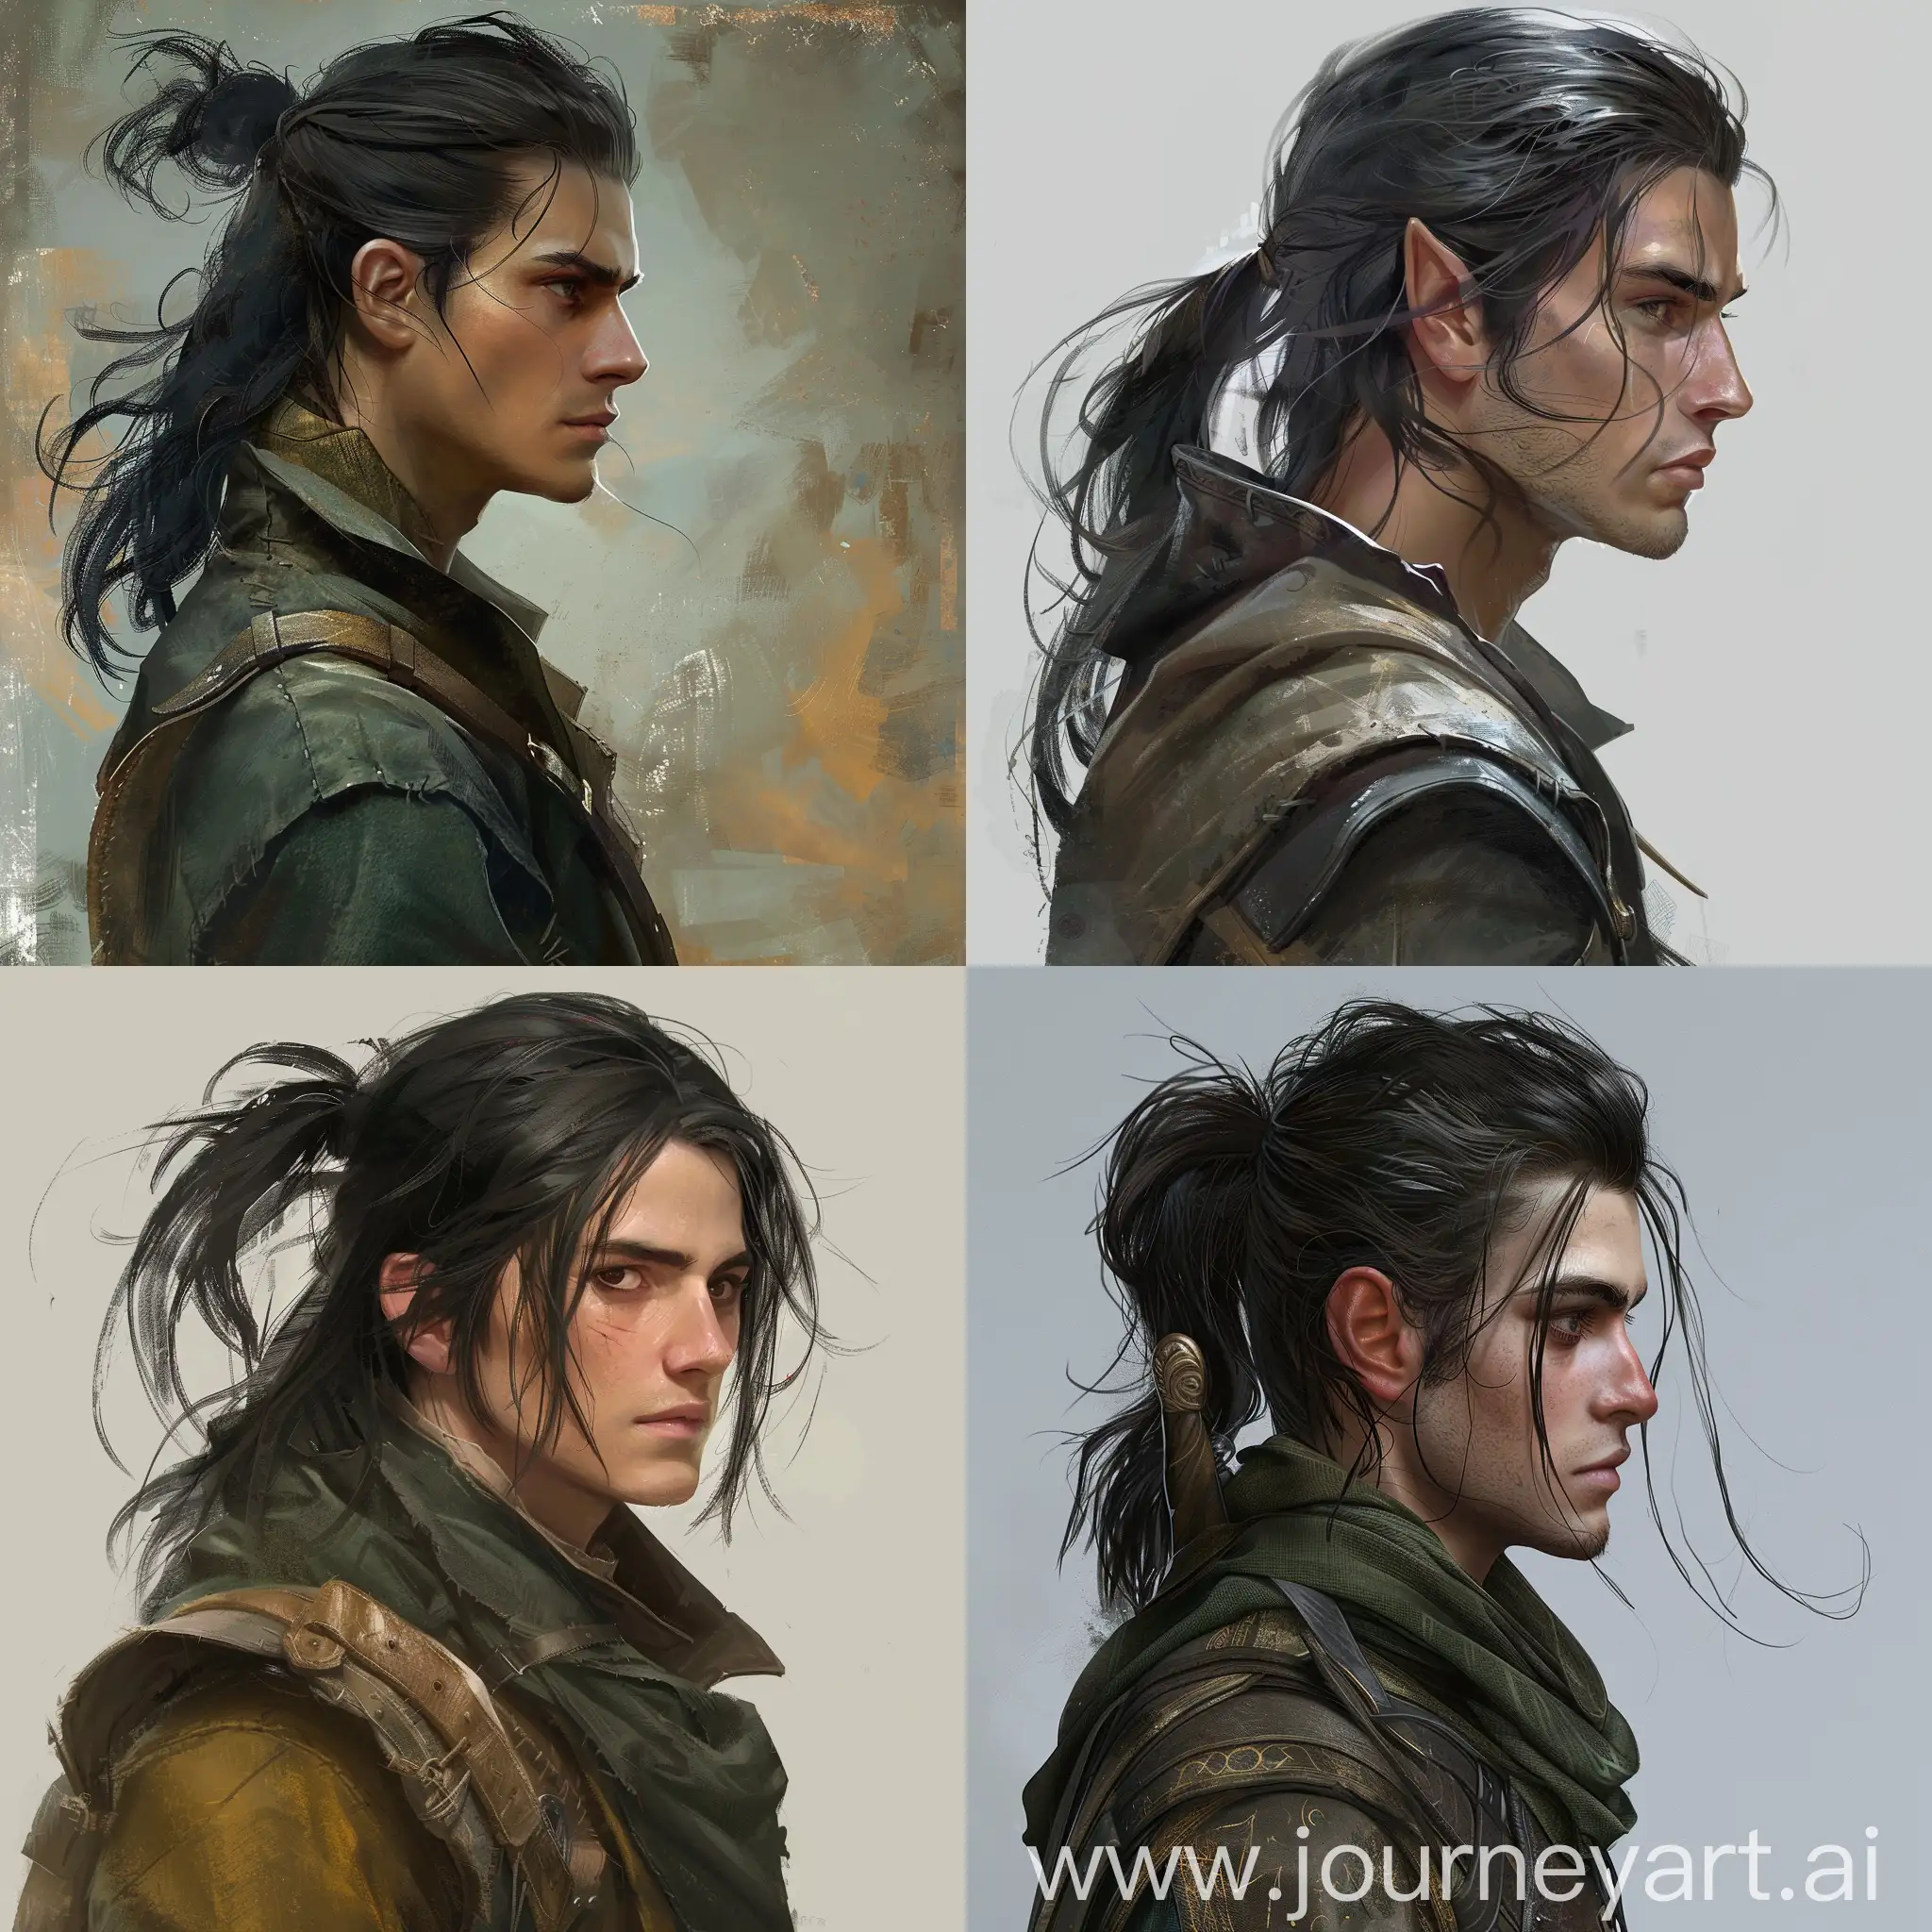 Aasimar-Ranger-Hunter-Male-in-His-Late-20s-with-Black-Hair-Ponytail